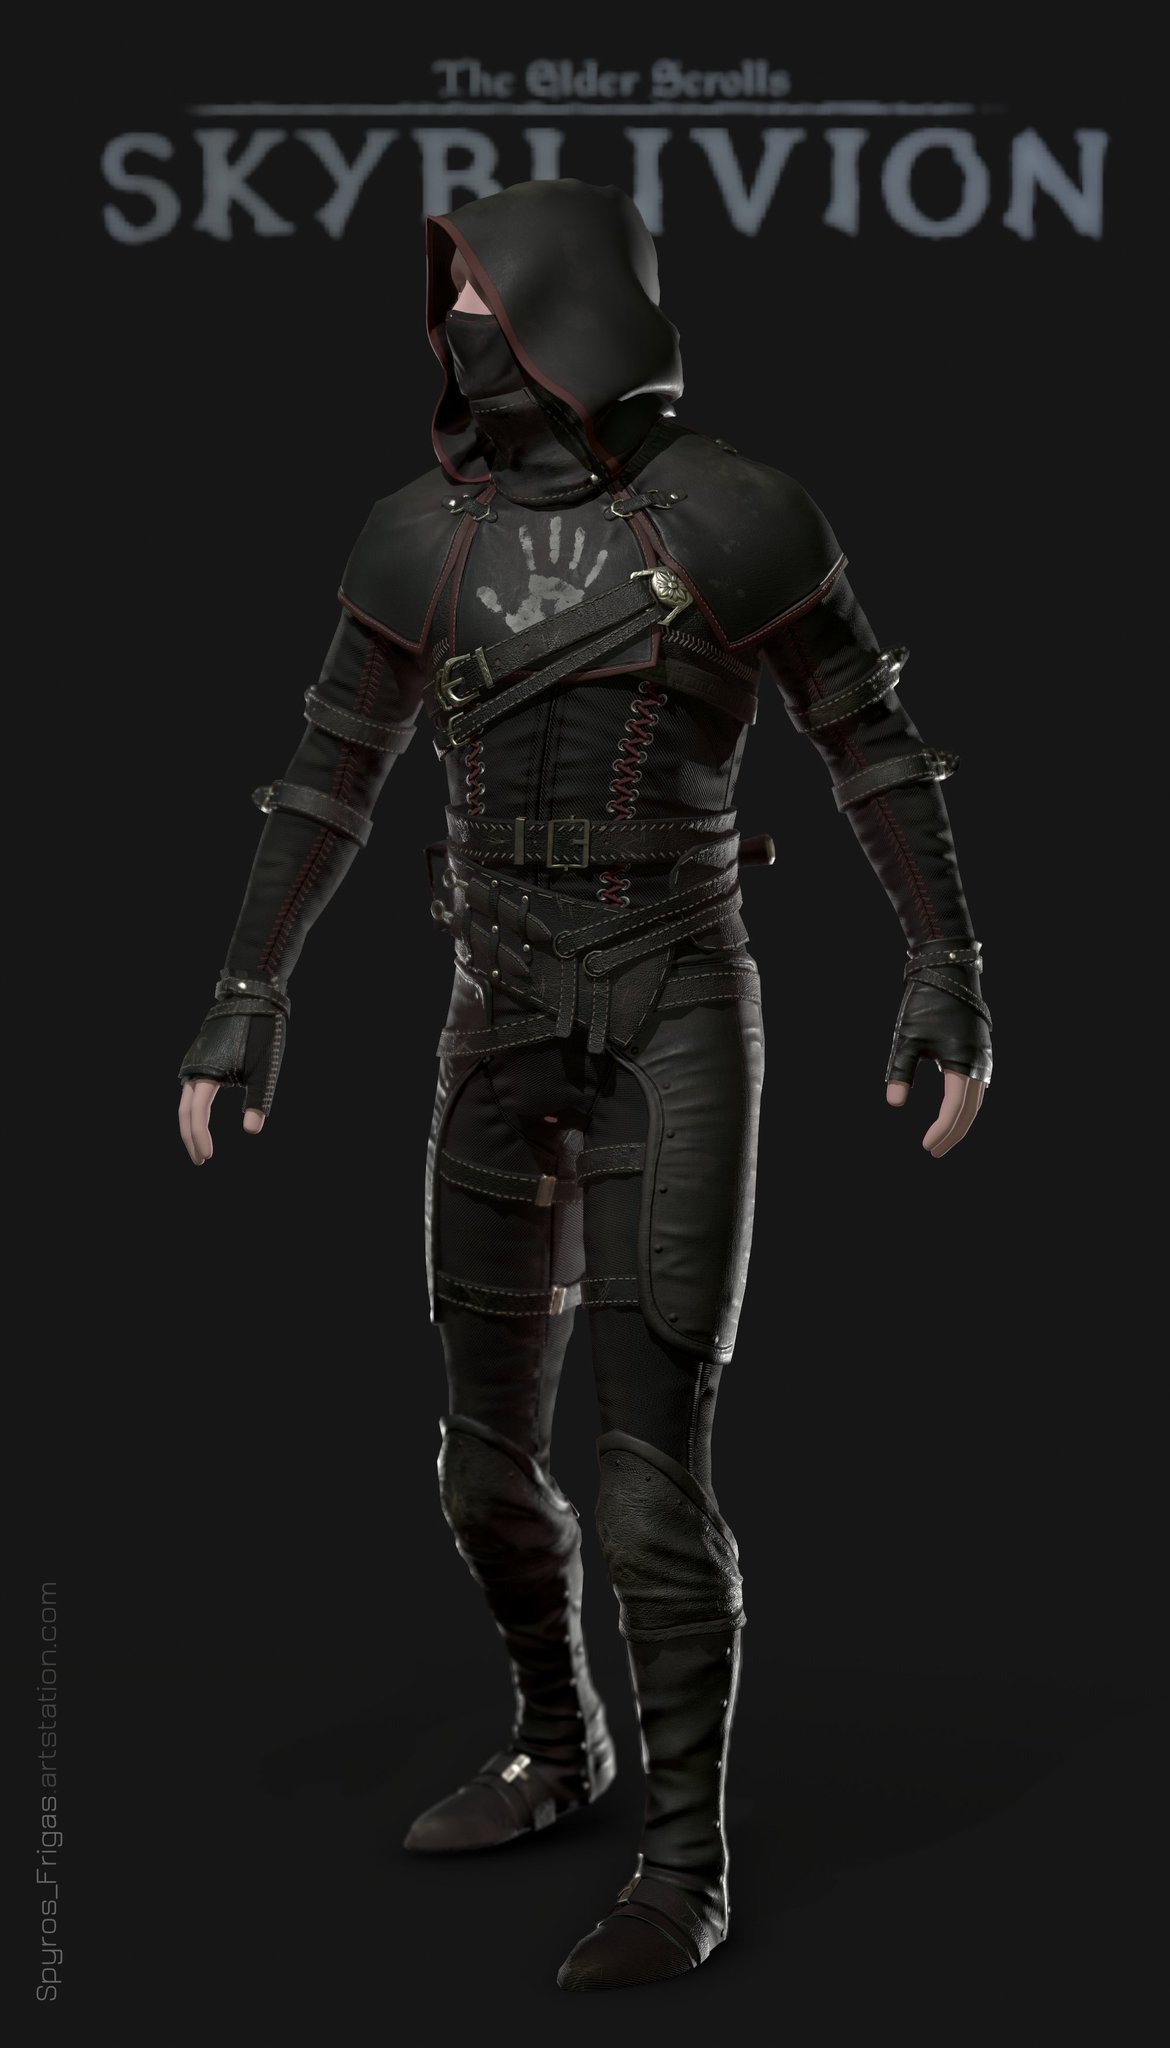 Skyblivion Thanks For The Feedback On Yesterdays Post Sfrigas Has Created An Additional Black Dark Brotherhood Set And We Agree That It Looks Awesome We Think You Will Enjoy How